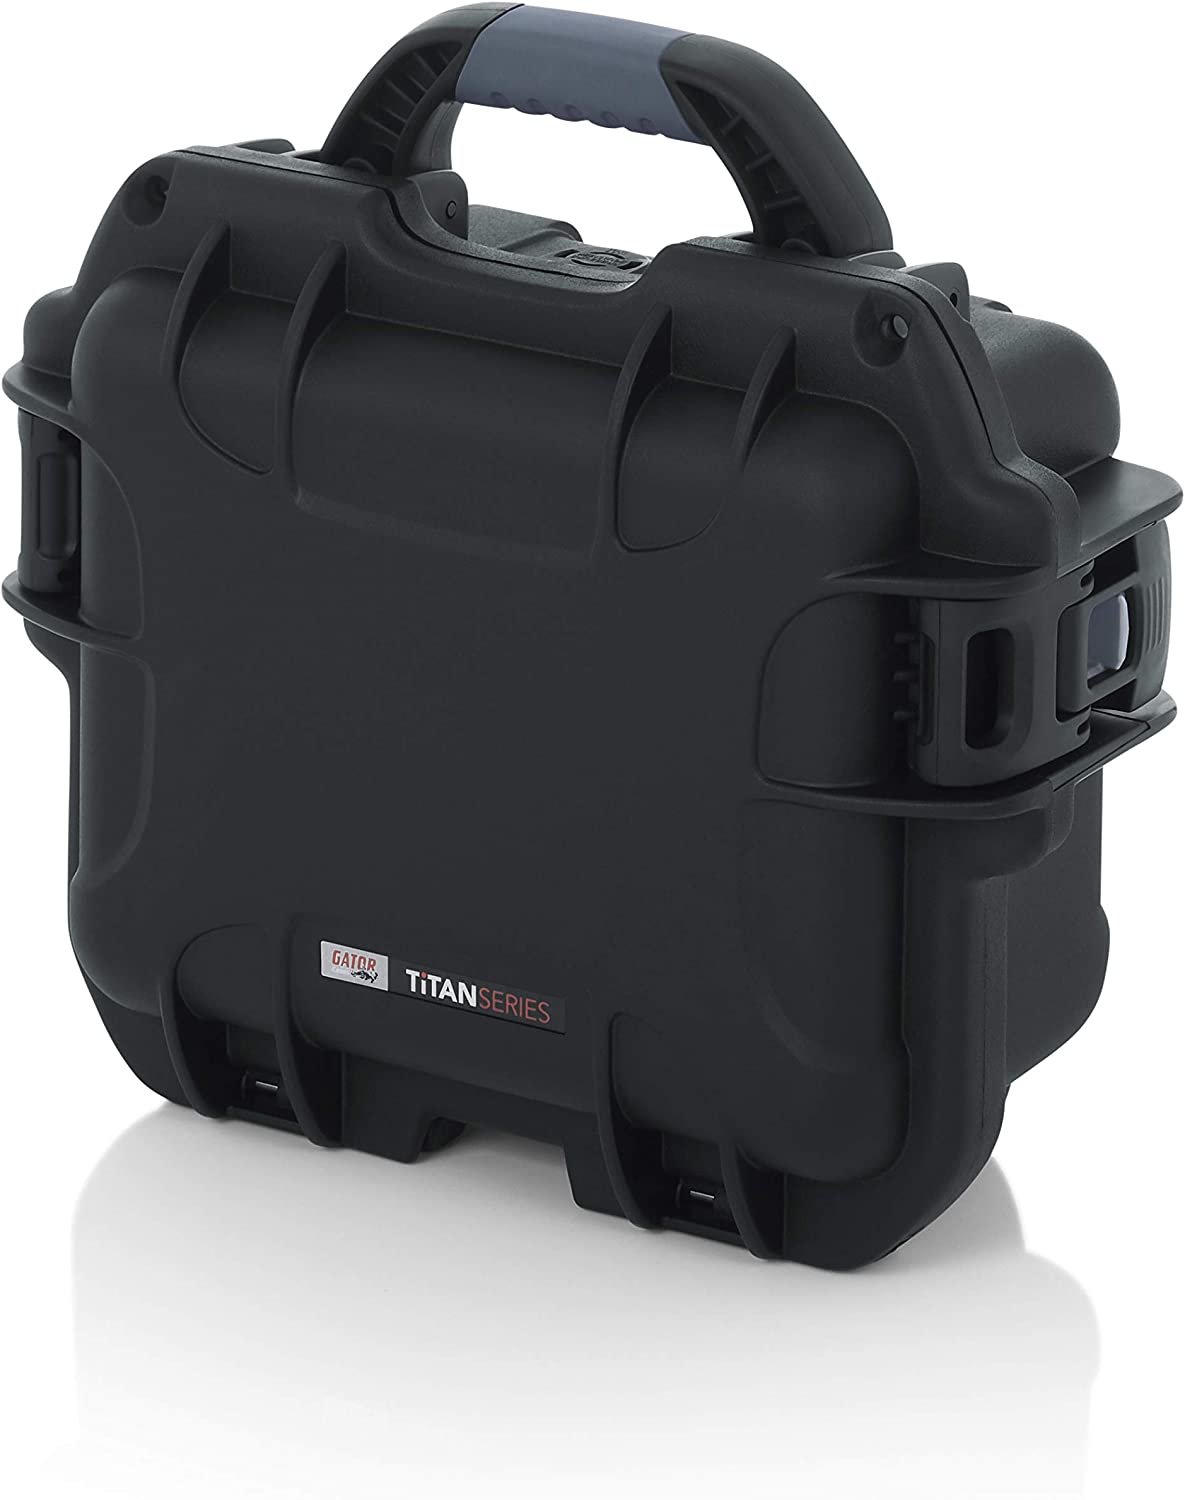 Gator Cases Titan Series Water Proof Case for Wireless Mic Systems - Pro-Distributing